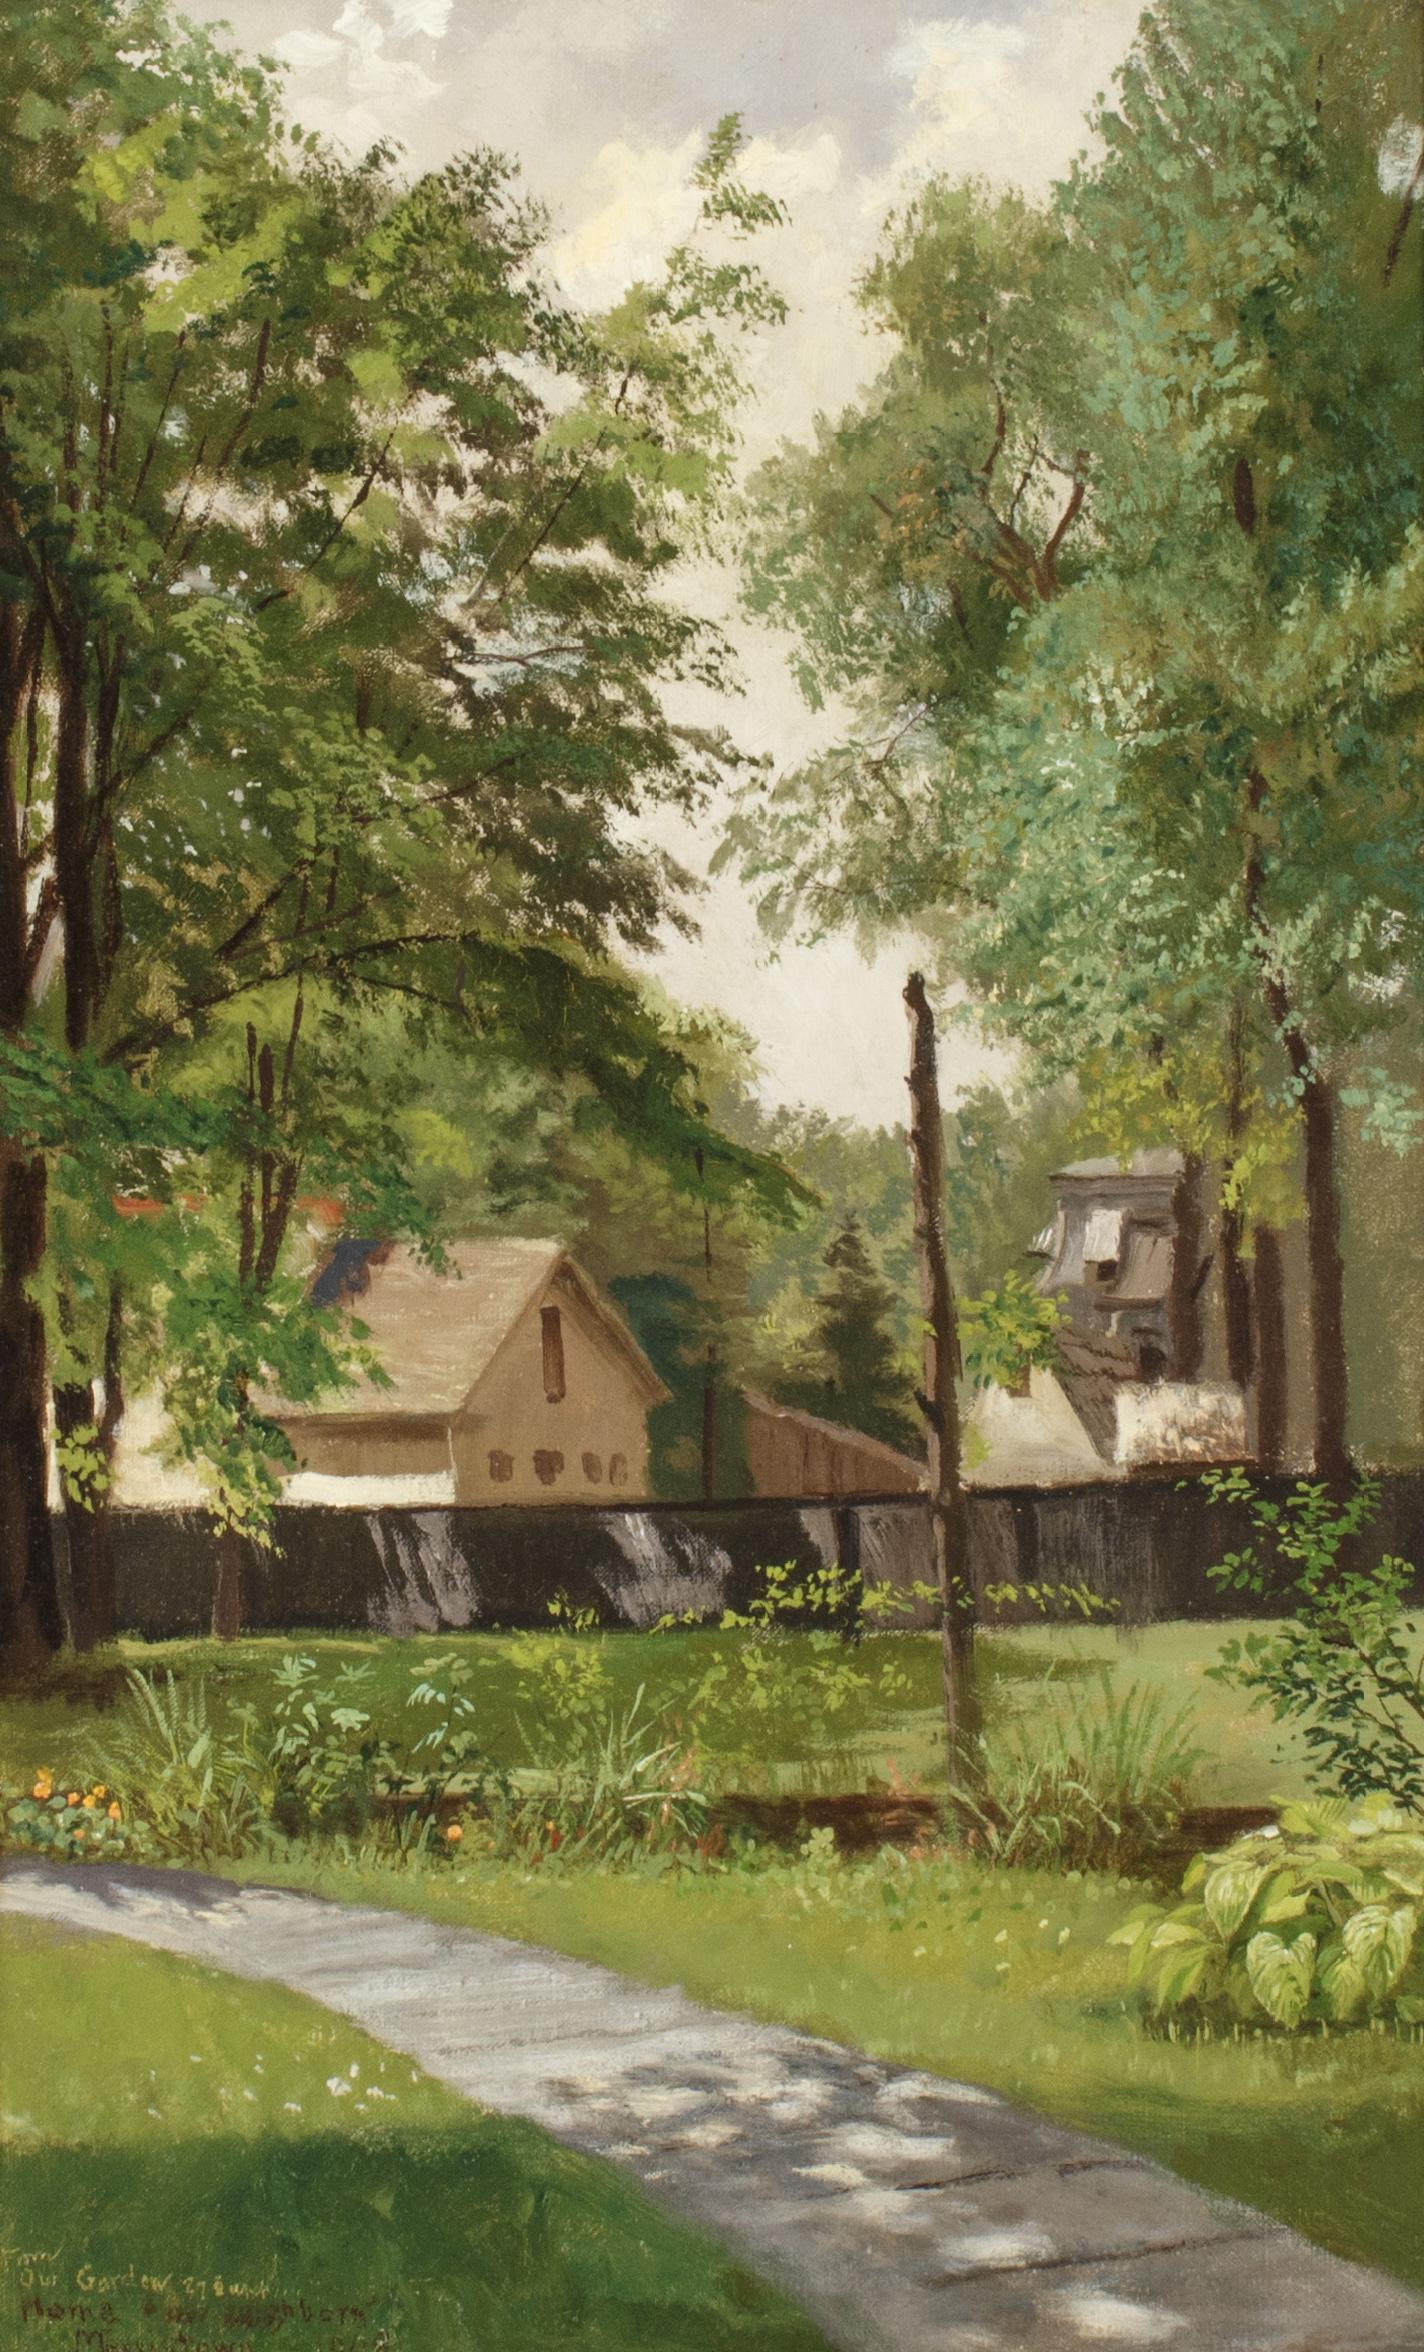 Oil painting of a House and Garden, Morristown, New Jersey in 1908 - Realist Painting by Frank Waller